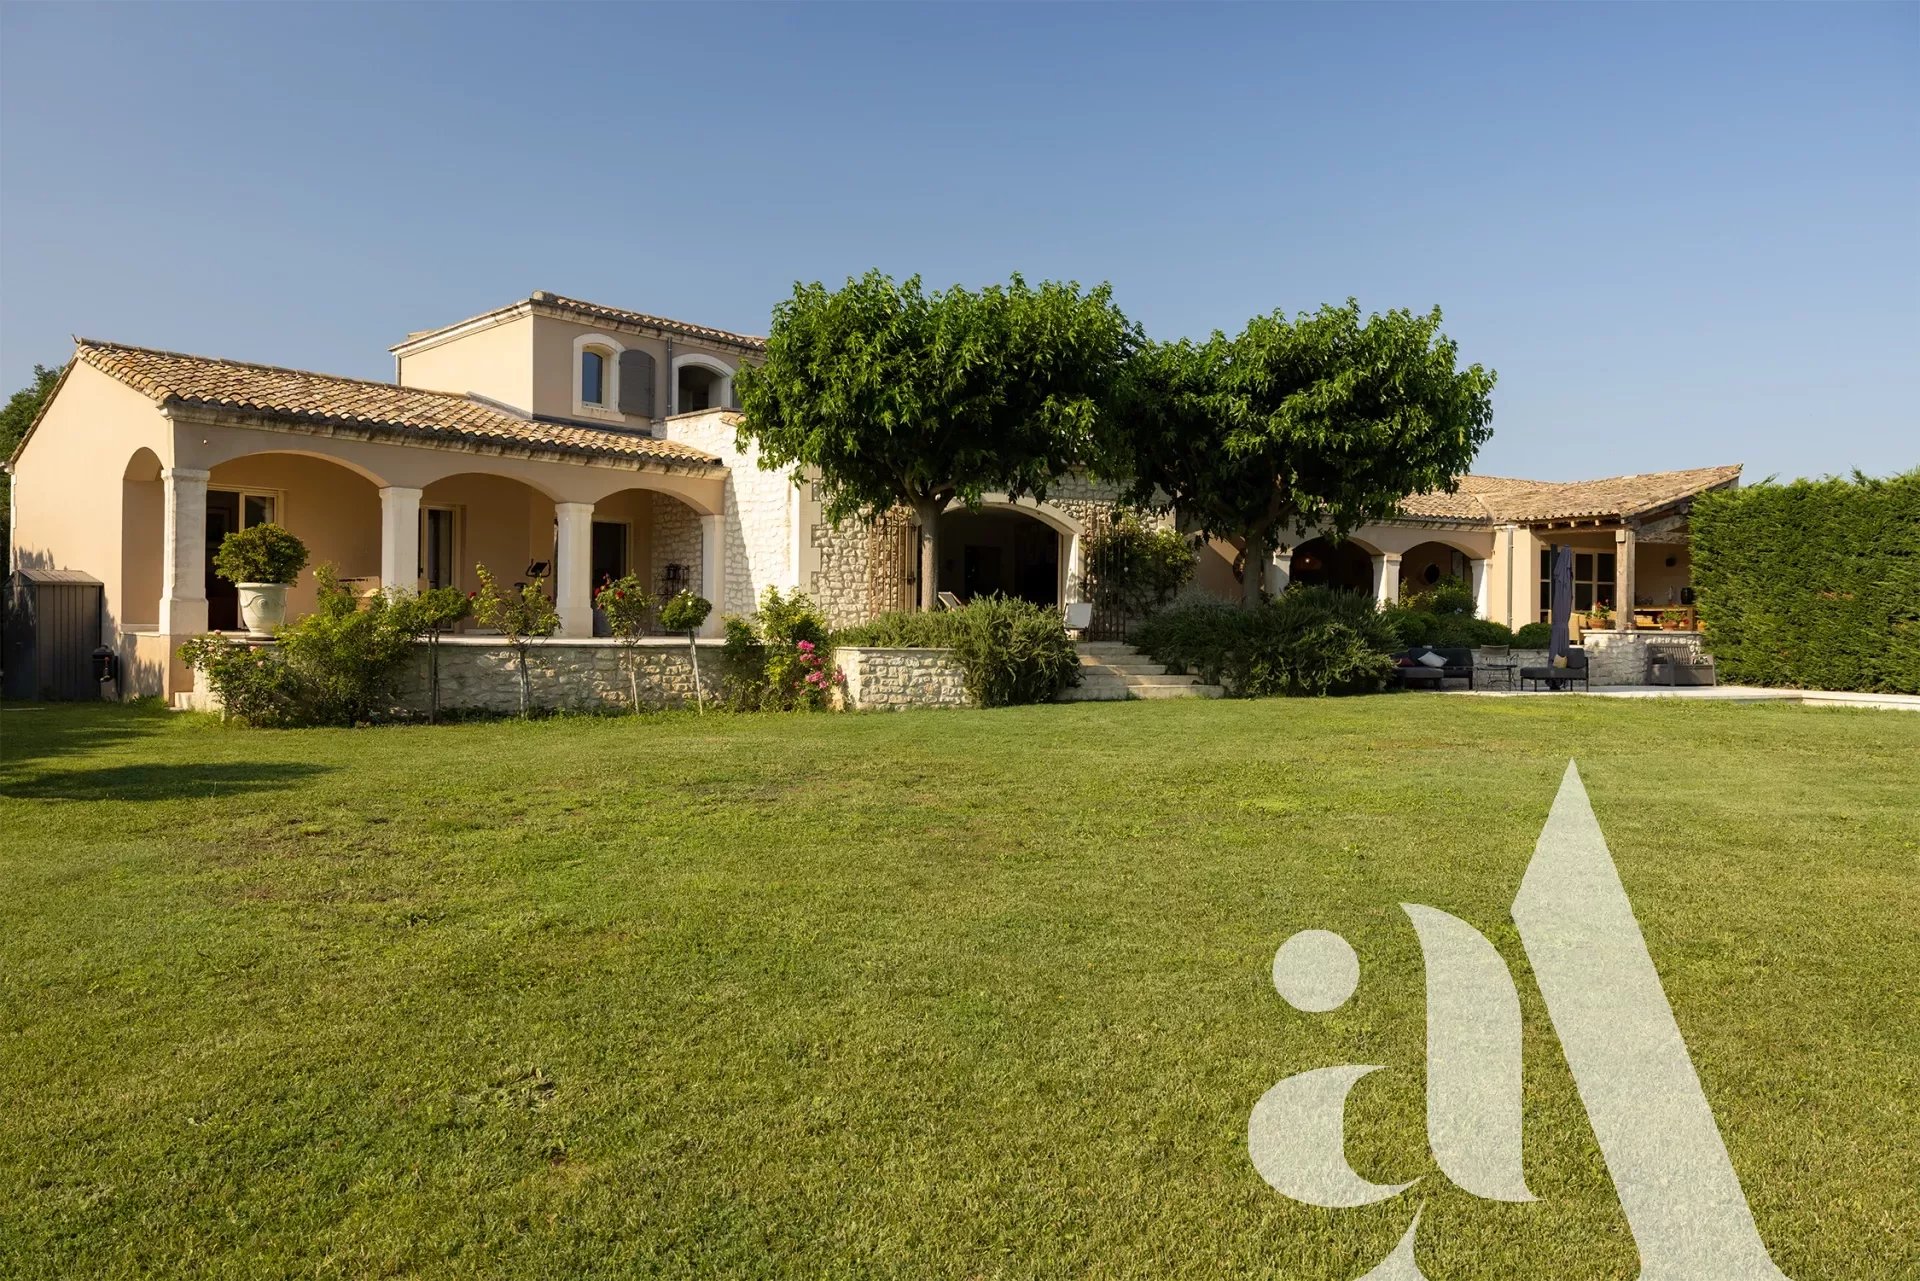 MAUSSANE LES ALPILLES - OLD VILLAGE - PROPERTY WITH 5 BEDROOMS